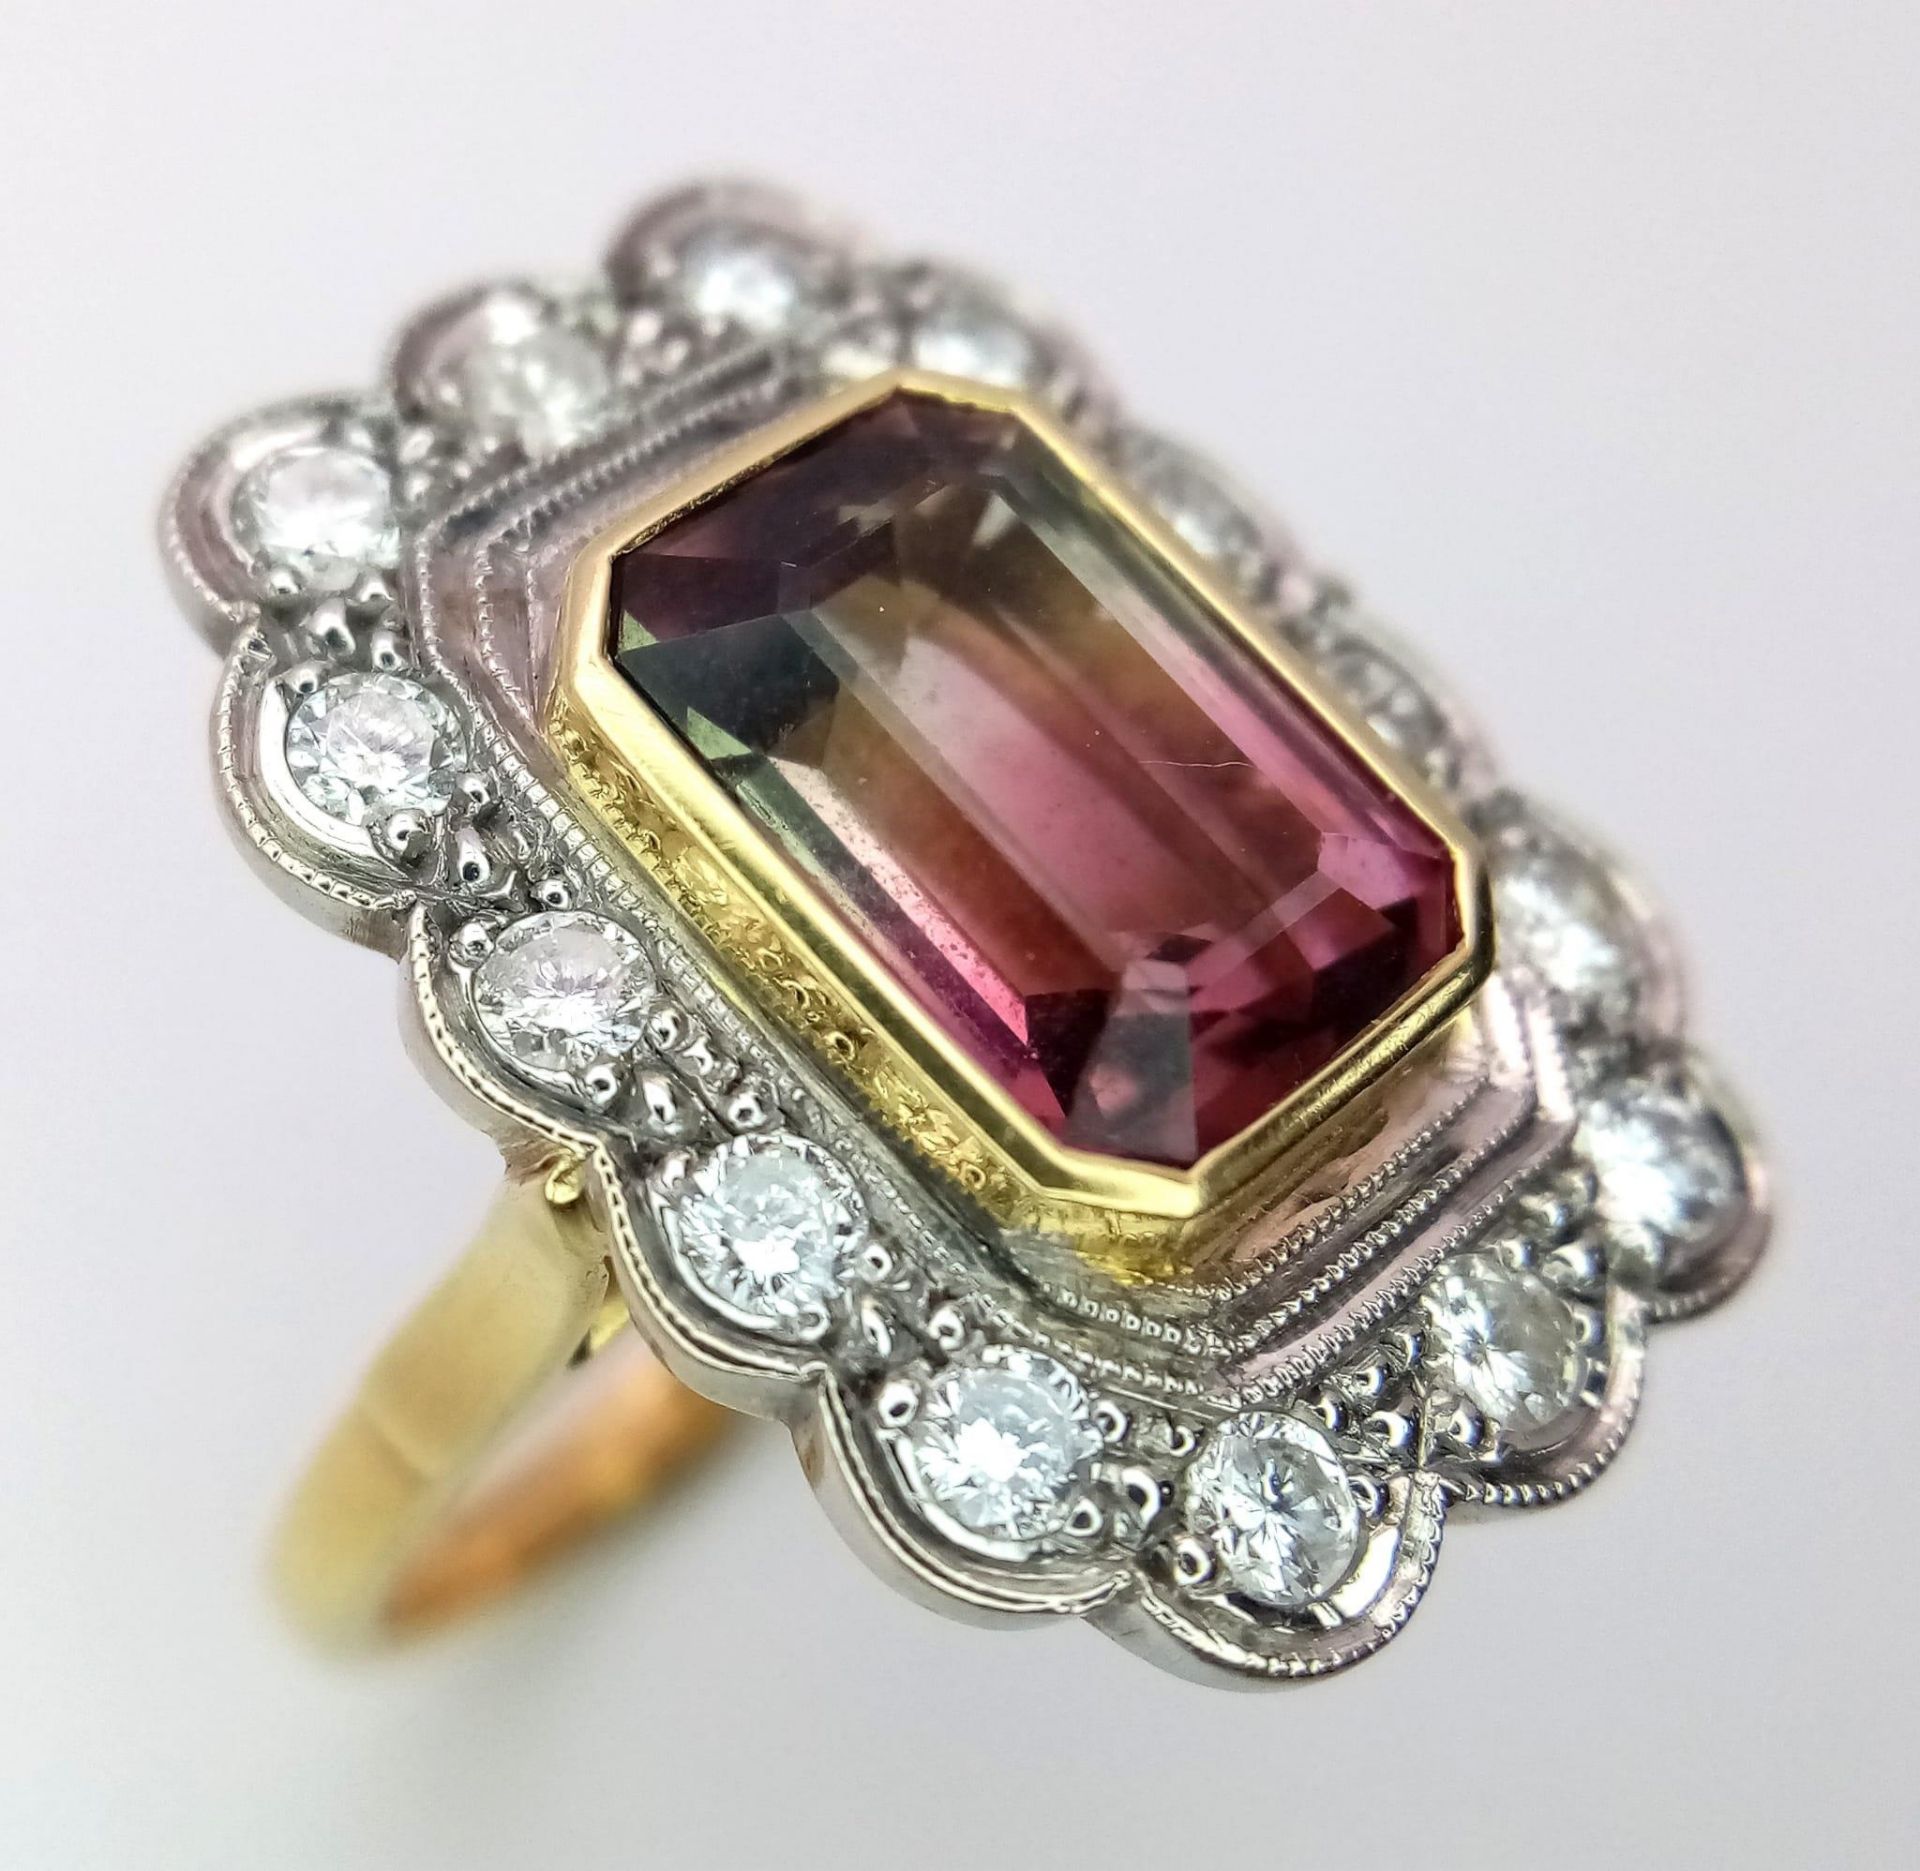 A 18K YELLOW GOLD DIAMOND AND BI COLOUR TOURMALINE CLUSTER RING 7.9G SIZE M 1/2 ref: STOCK 6765 - Image 3 of 7